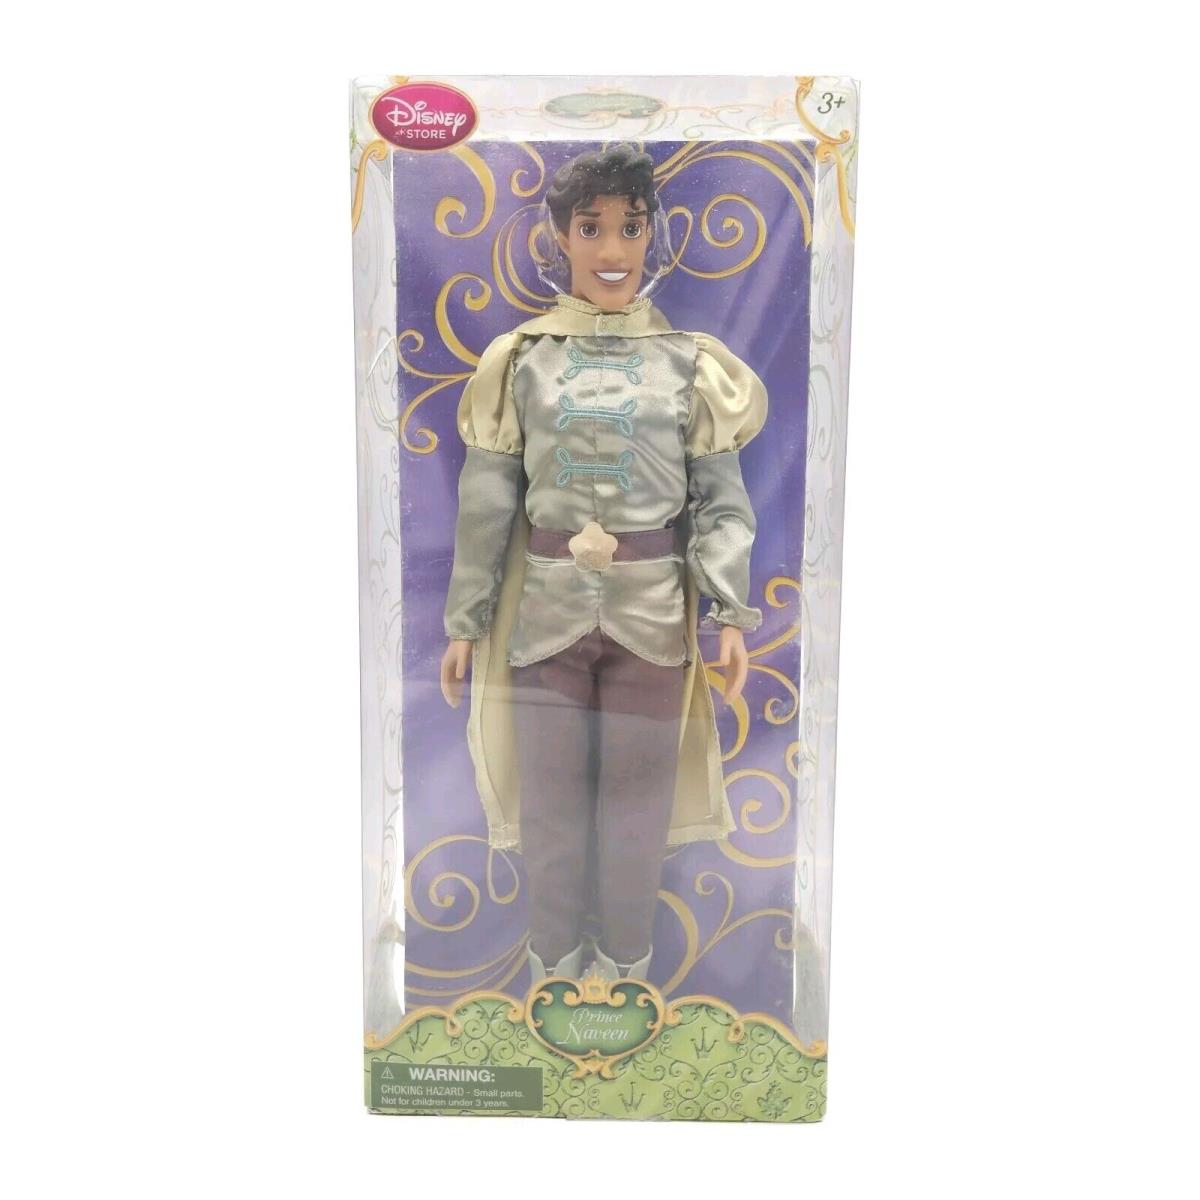 Disney Store Prince Naveen Classic Doll Collection Toy Figure Princess and Frog